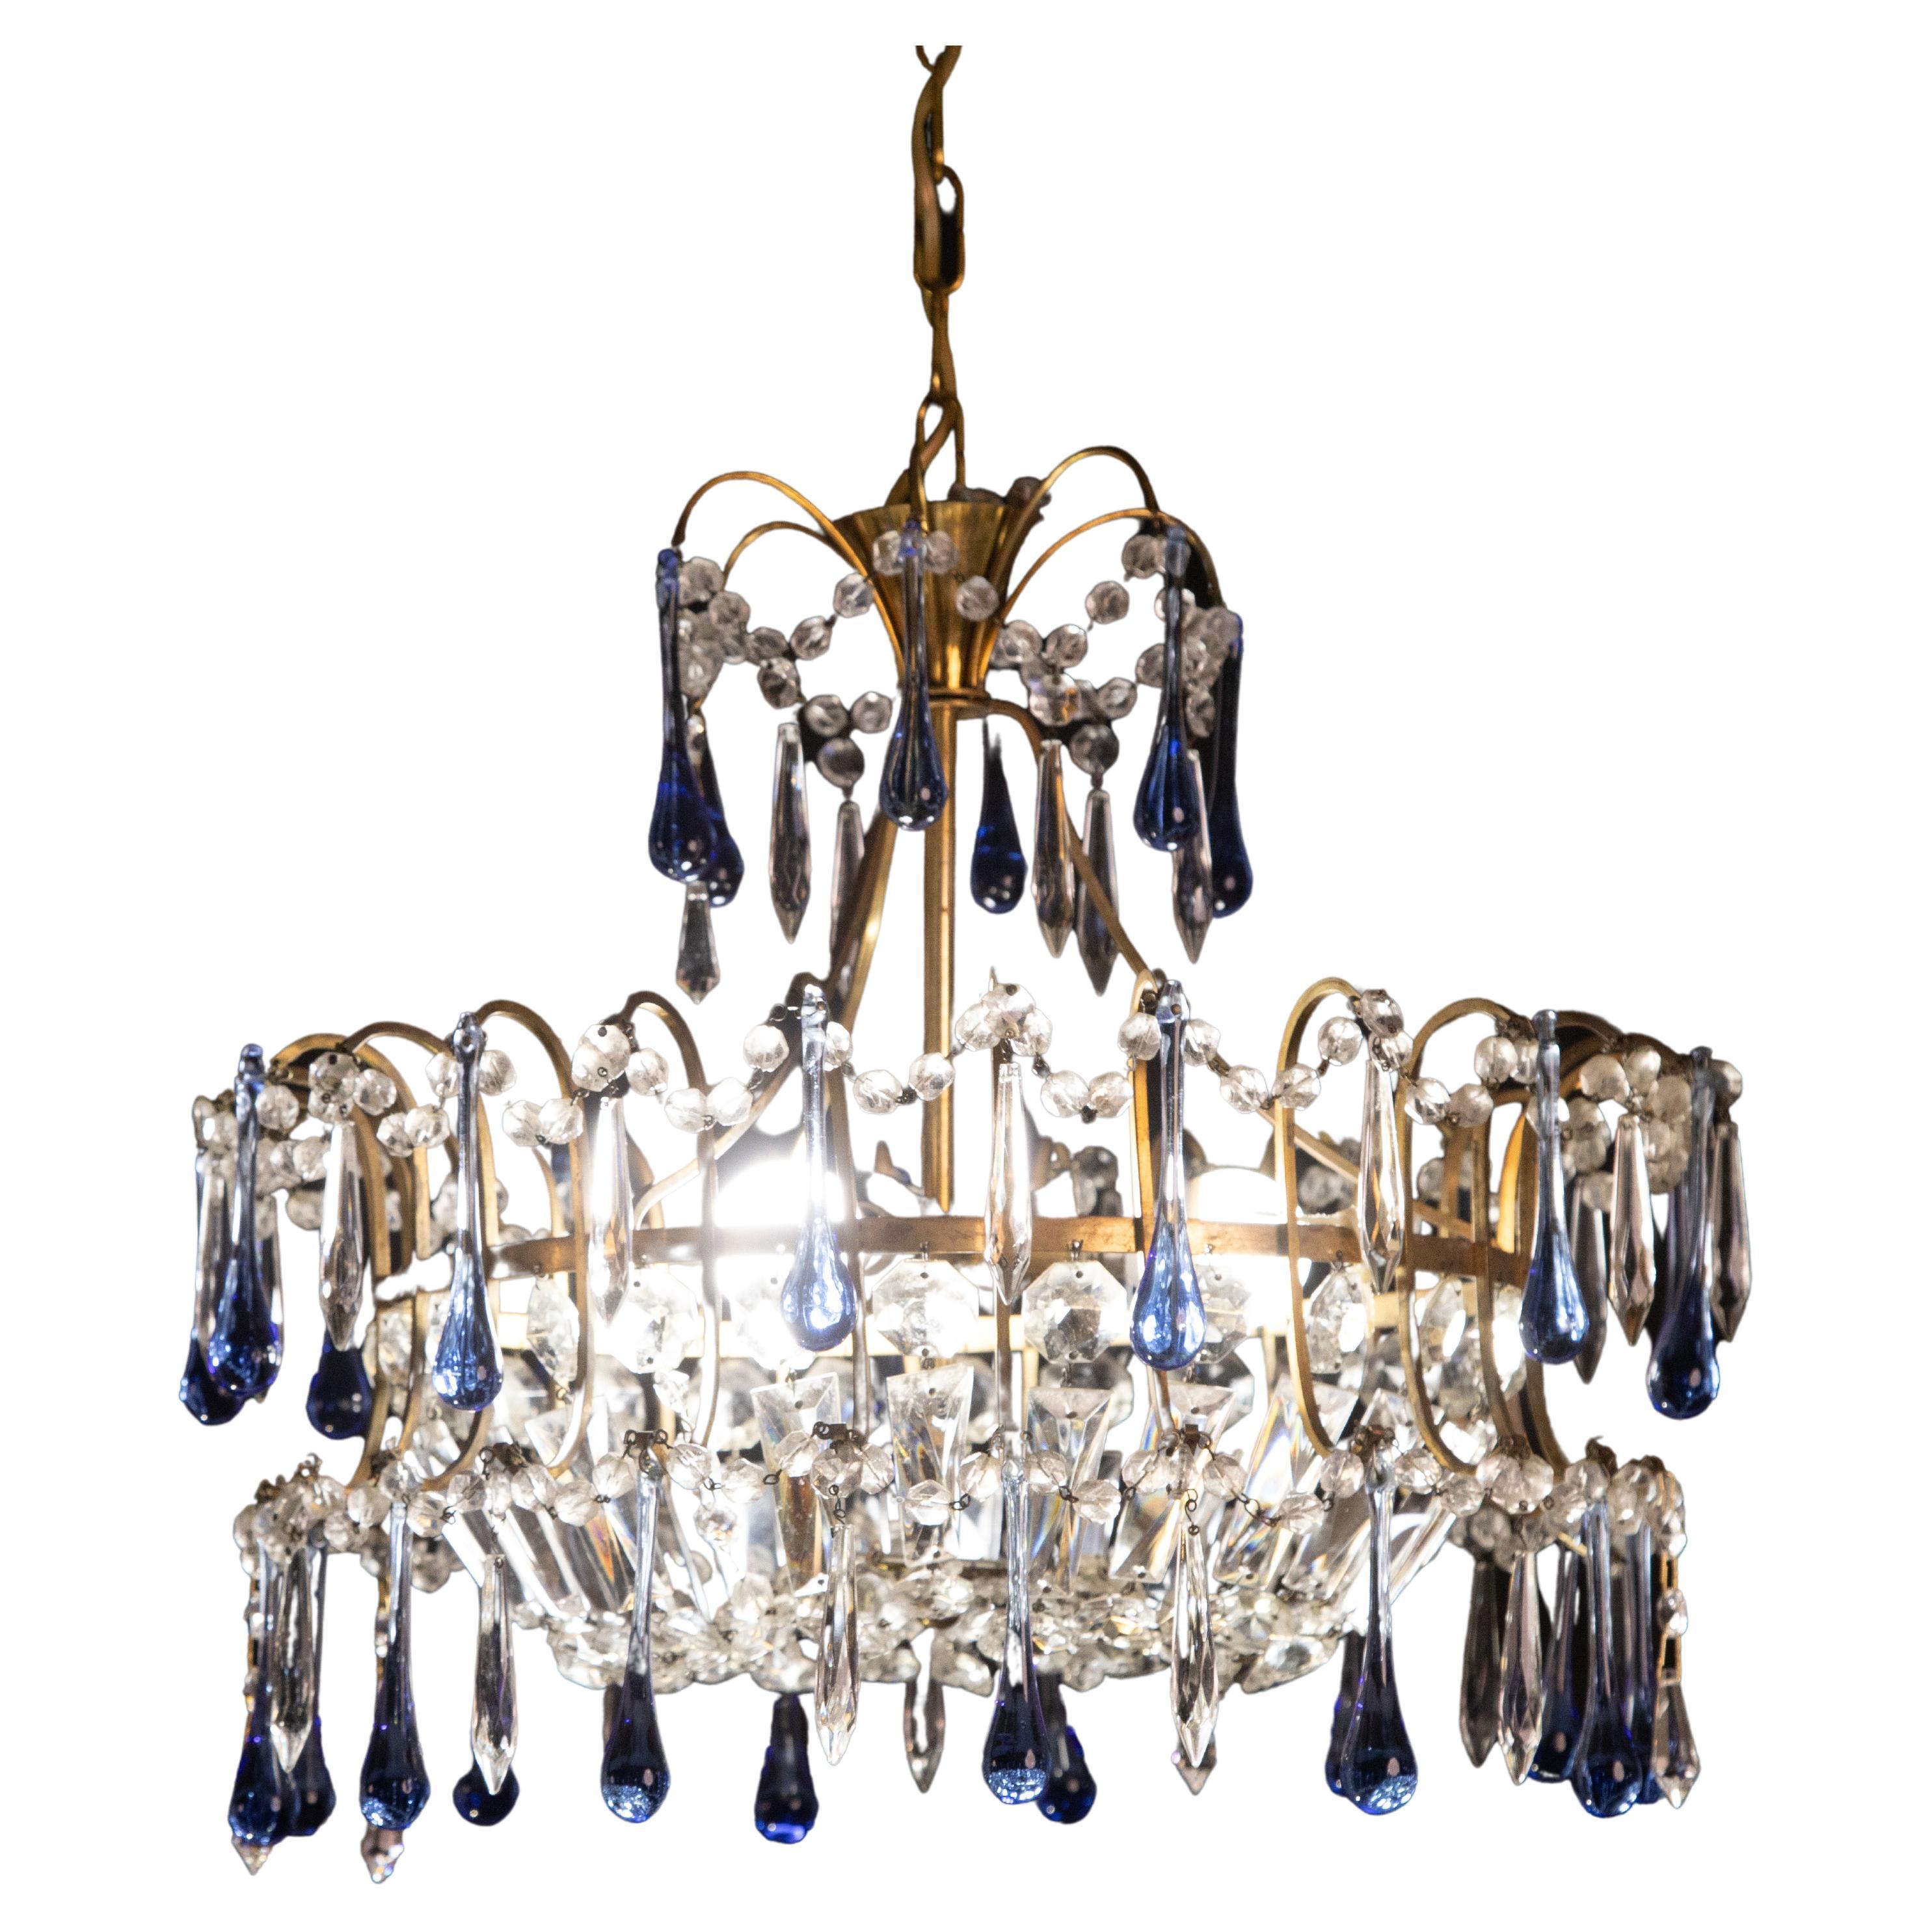 Emperor-style chandelier formed by rounds of crystals decorated with blue glass drops.


The chandelier is 100 centimeters high with the chain, 55 centimeters without the chain and is 45 centimeters wide.

It mounts three e14 lights.

A few crystals